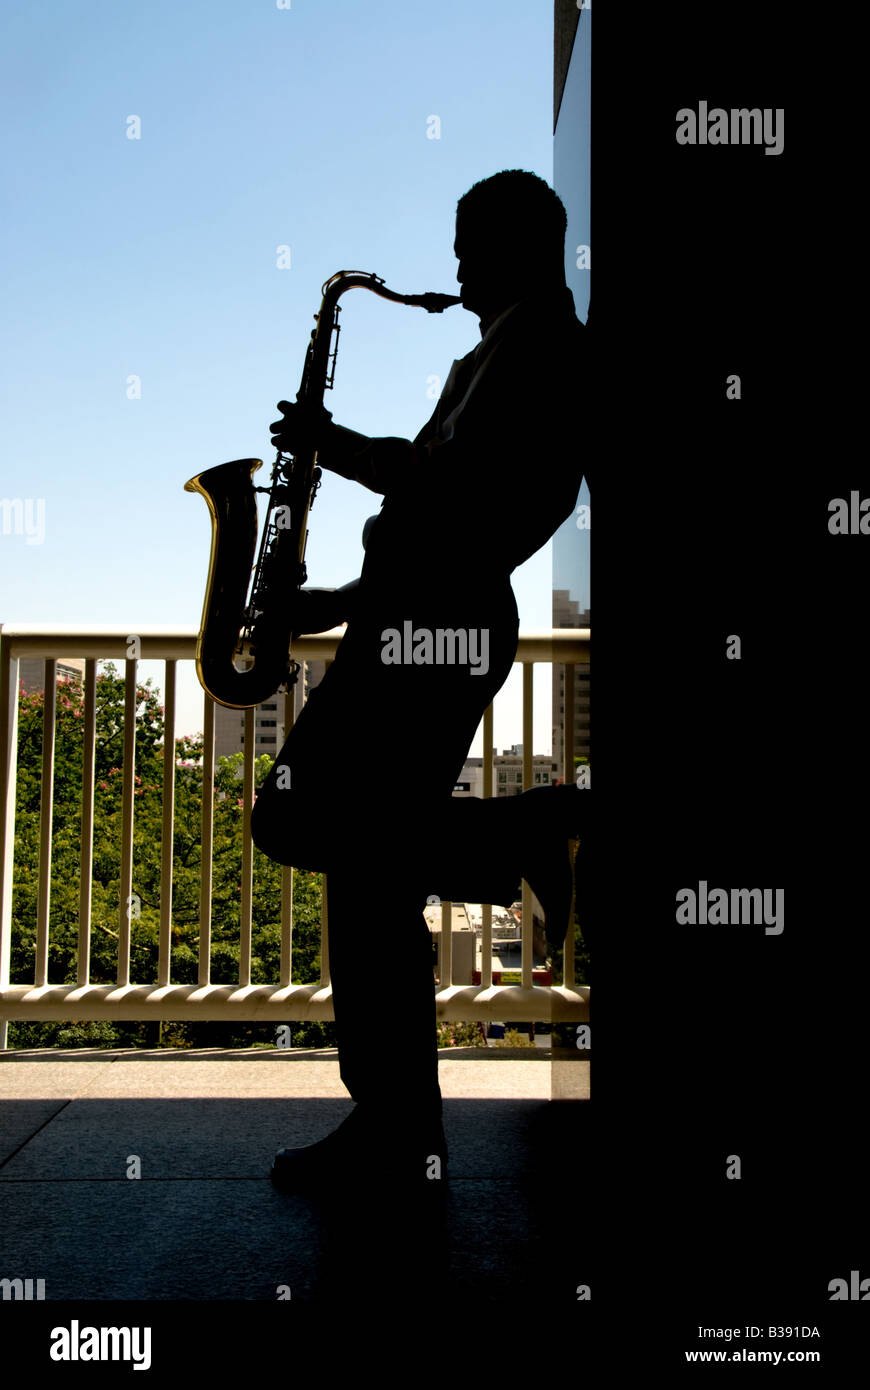 A saxophone player silhouetted against the bright daylight Stock Photo